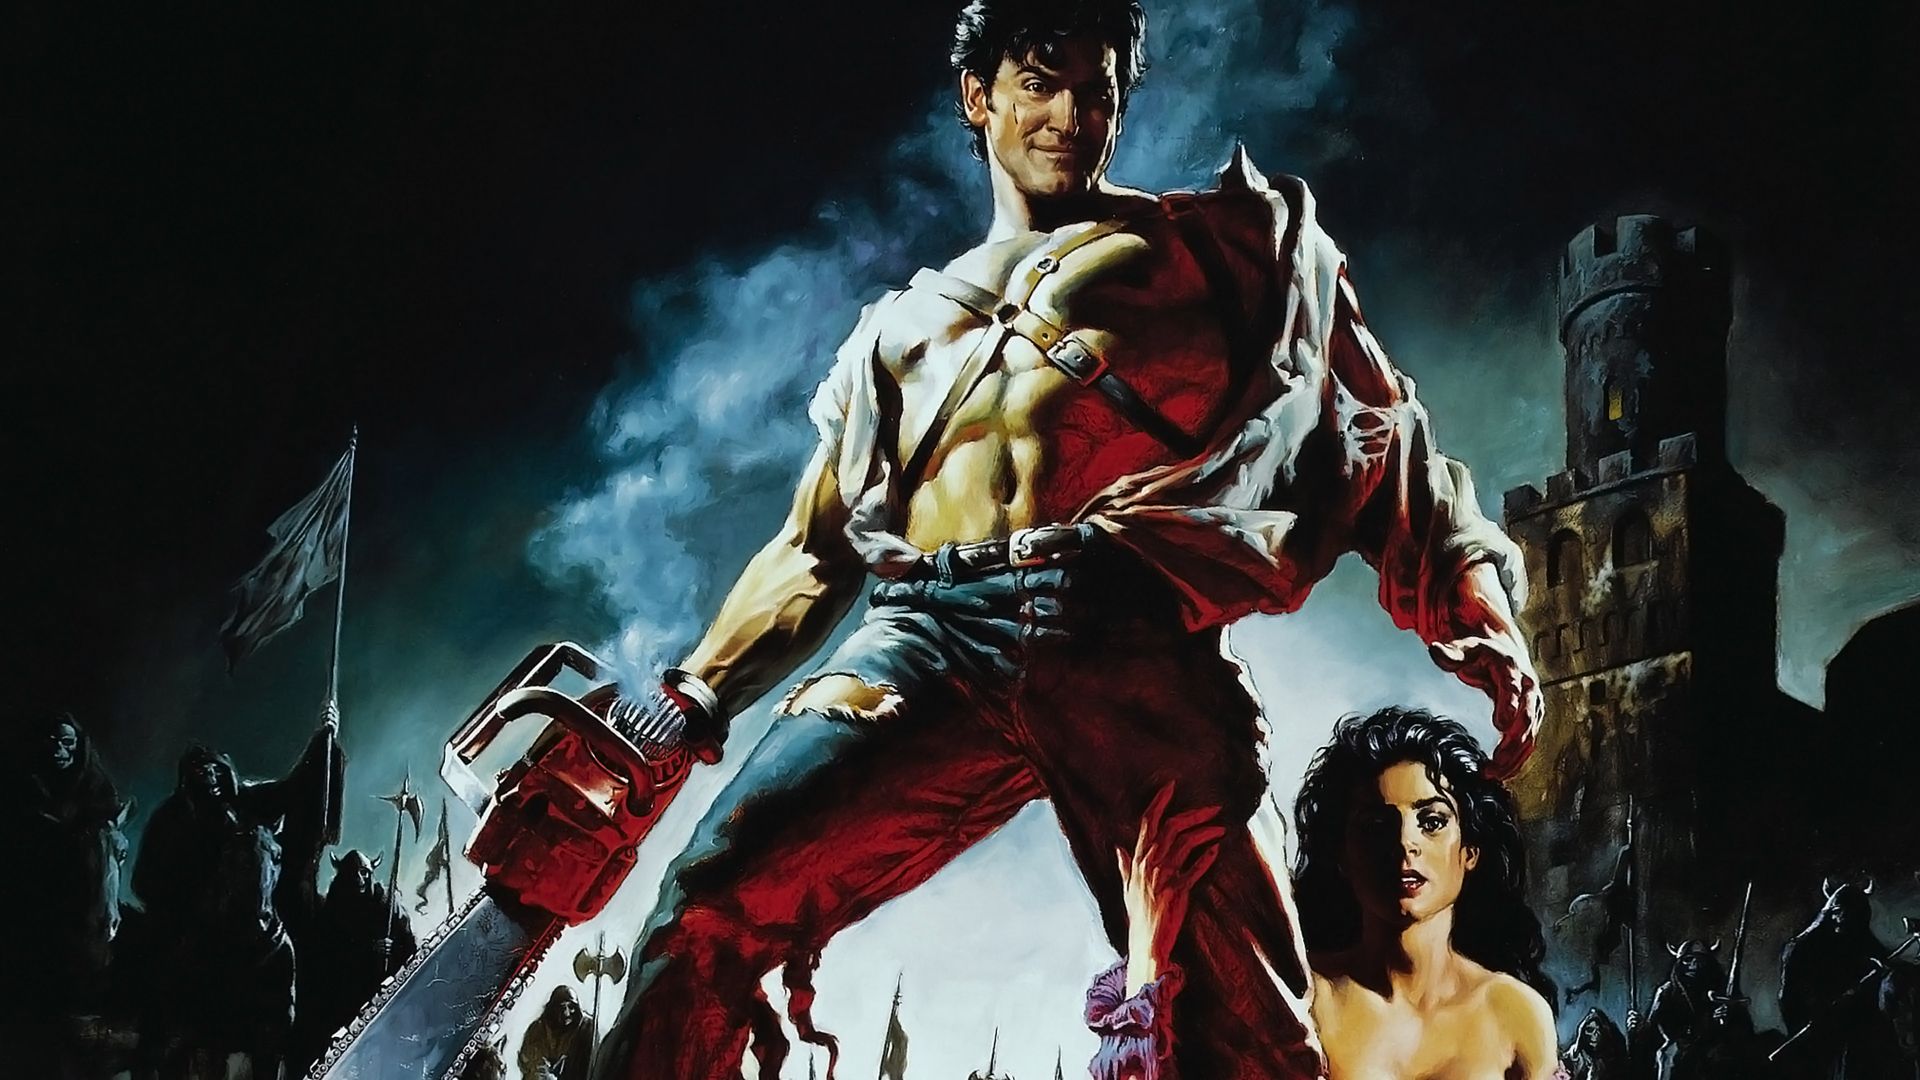 Army of Darkness background